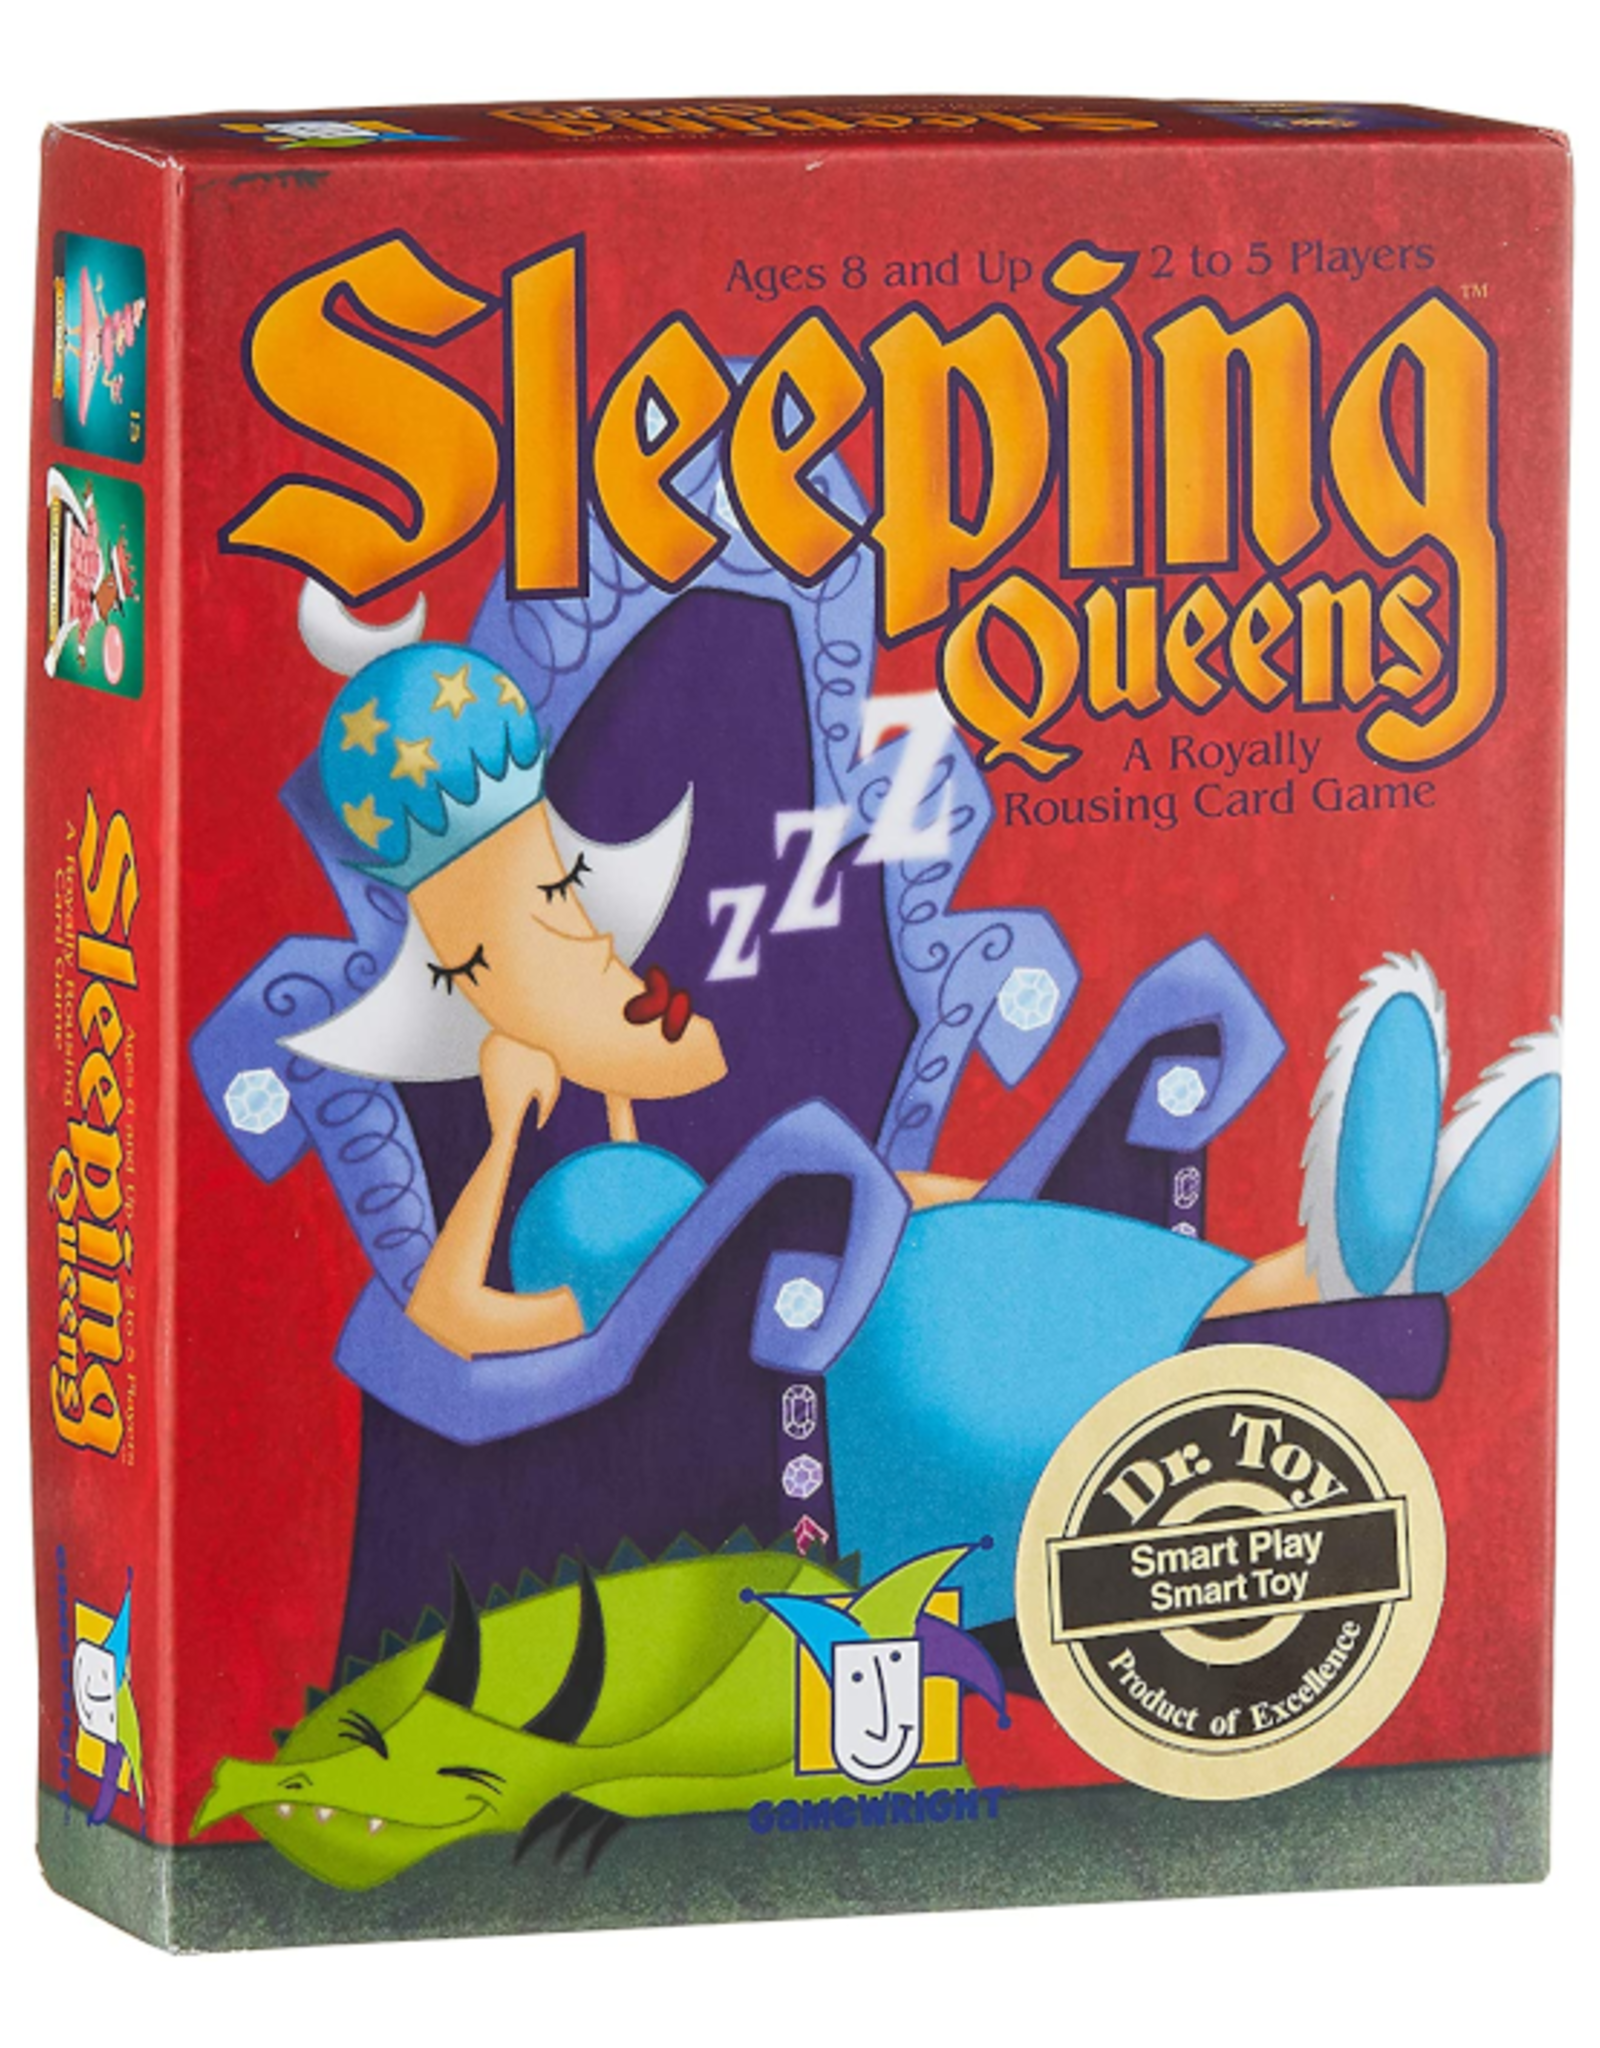 Gamewright Gamewright - Sleeping Queens